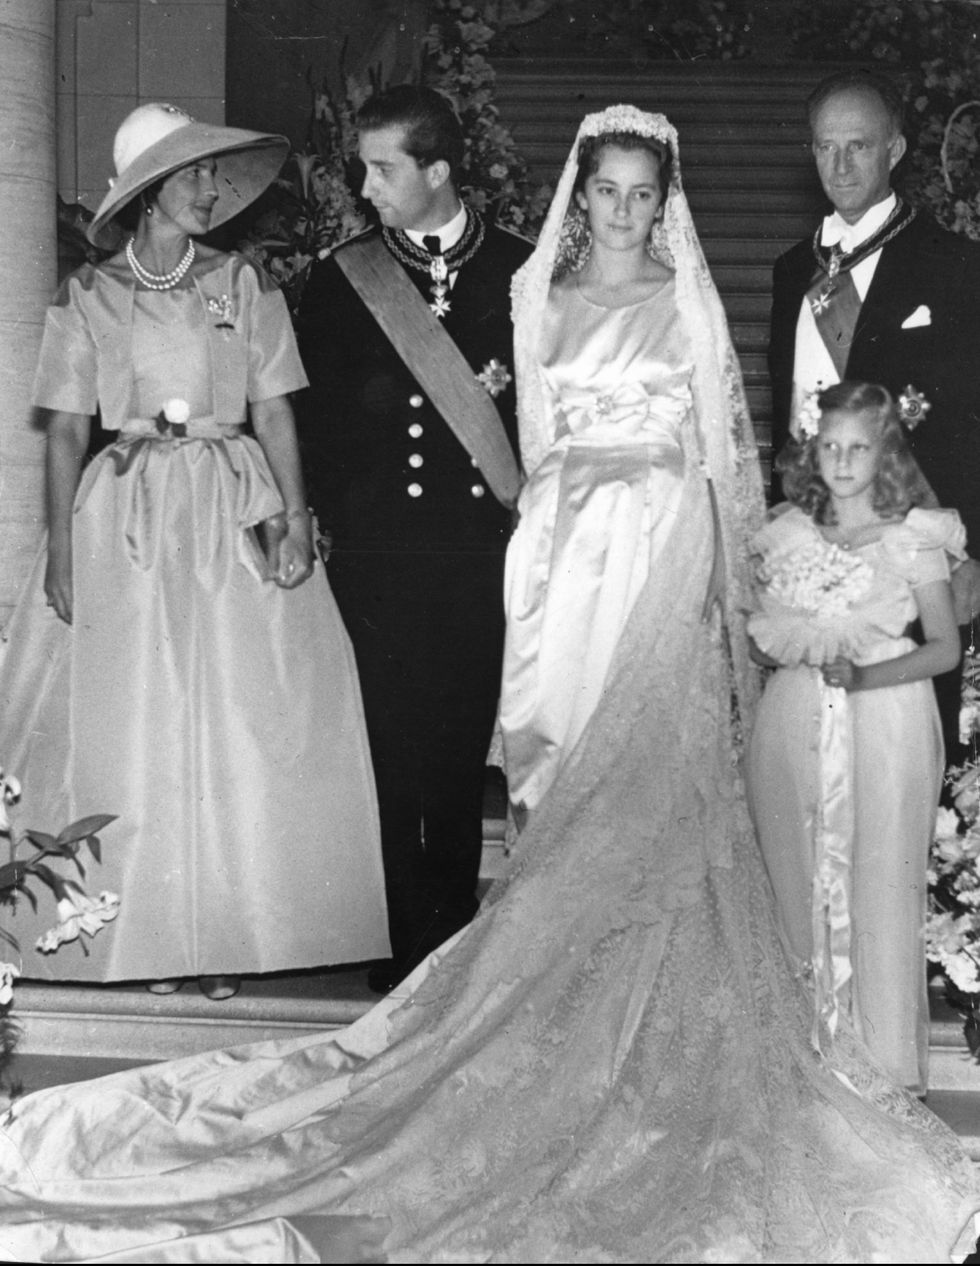 Wedding of Prince Albert of Belgium and Donna Paola